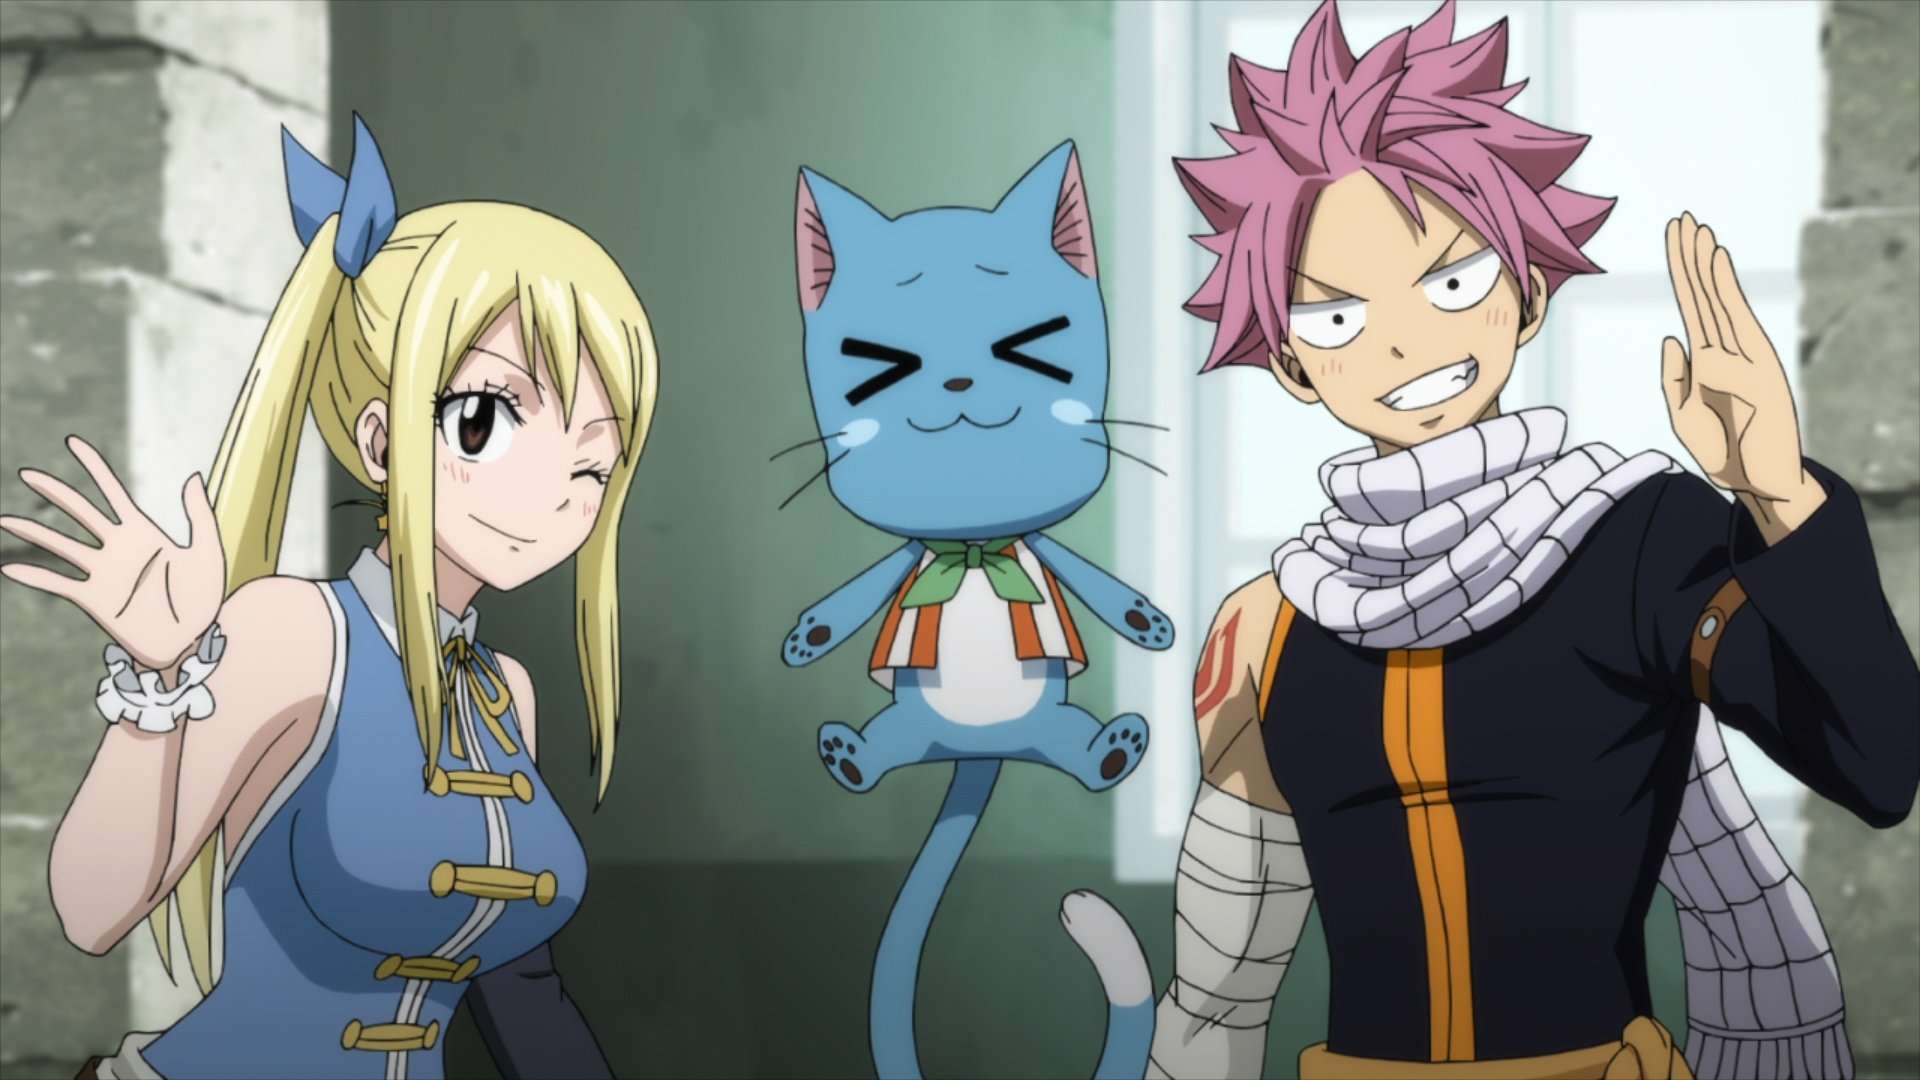 Is Season 9 the final season of Fairy Tail or will there be another season?